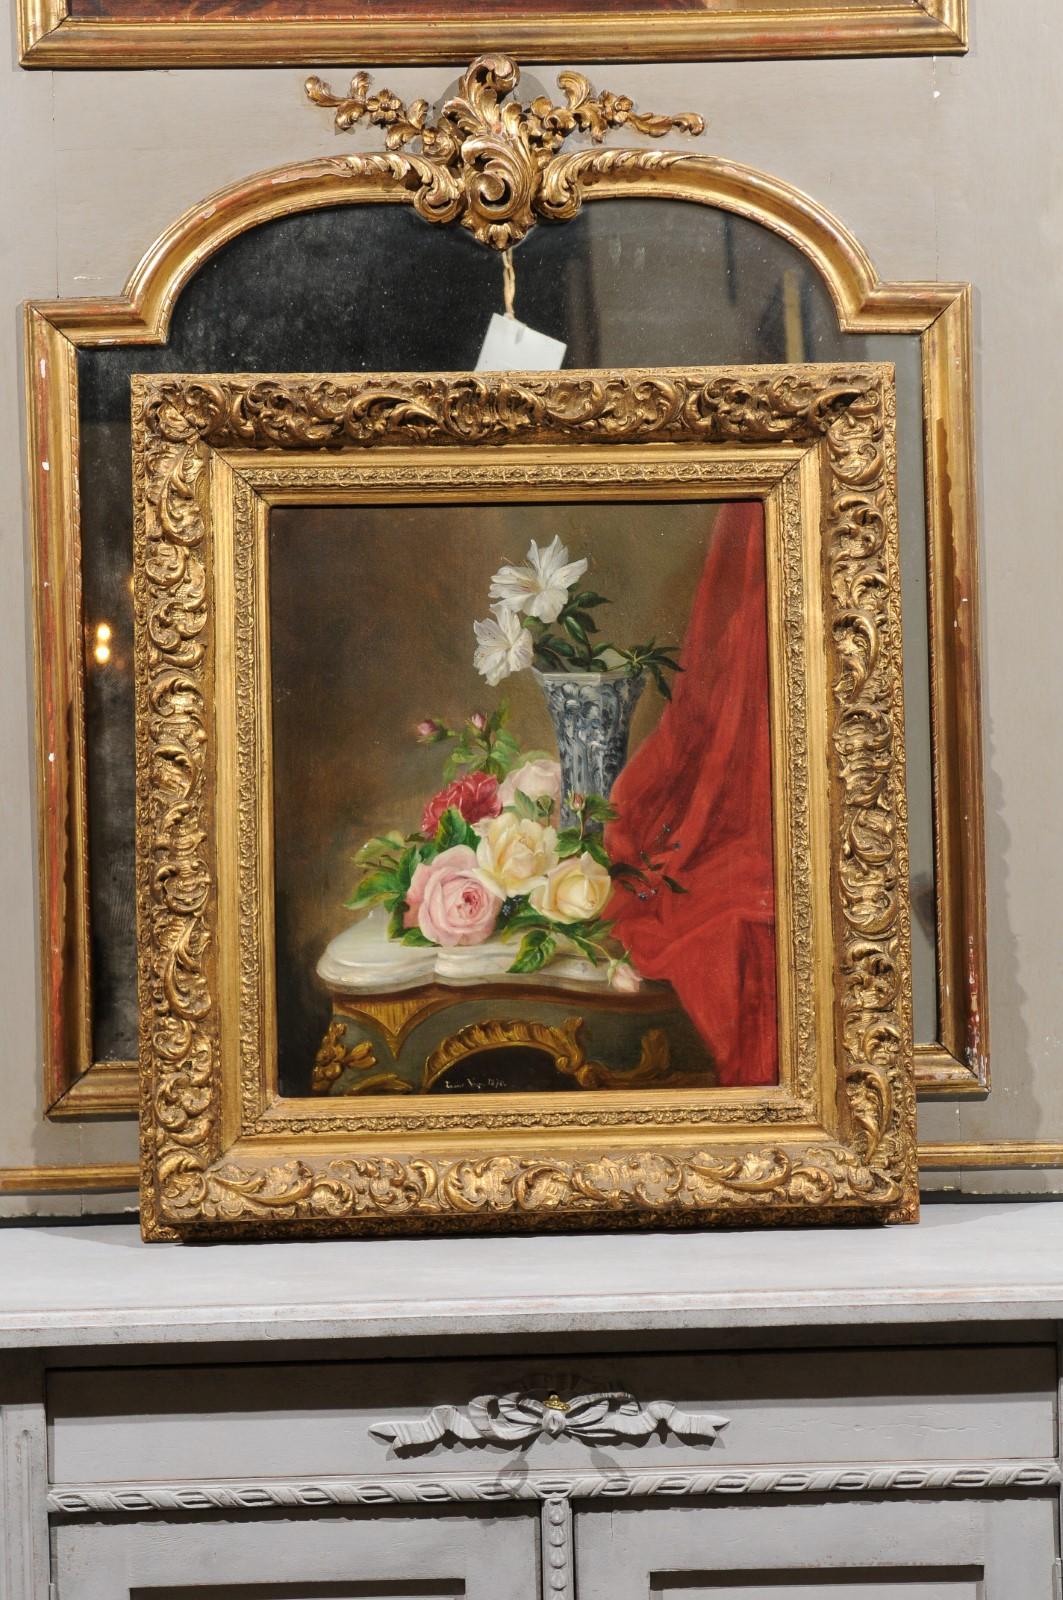 A French still-life framed oil painting from the 19th century, depicting flowers set on a Rococo table. Born in France during the politically dynamic 19th century, this exquisite oil painting depicts elegant flowers, some of them displayed in a blue